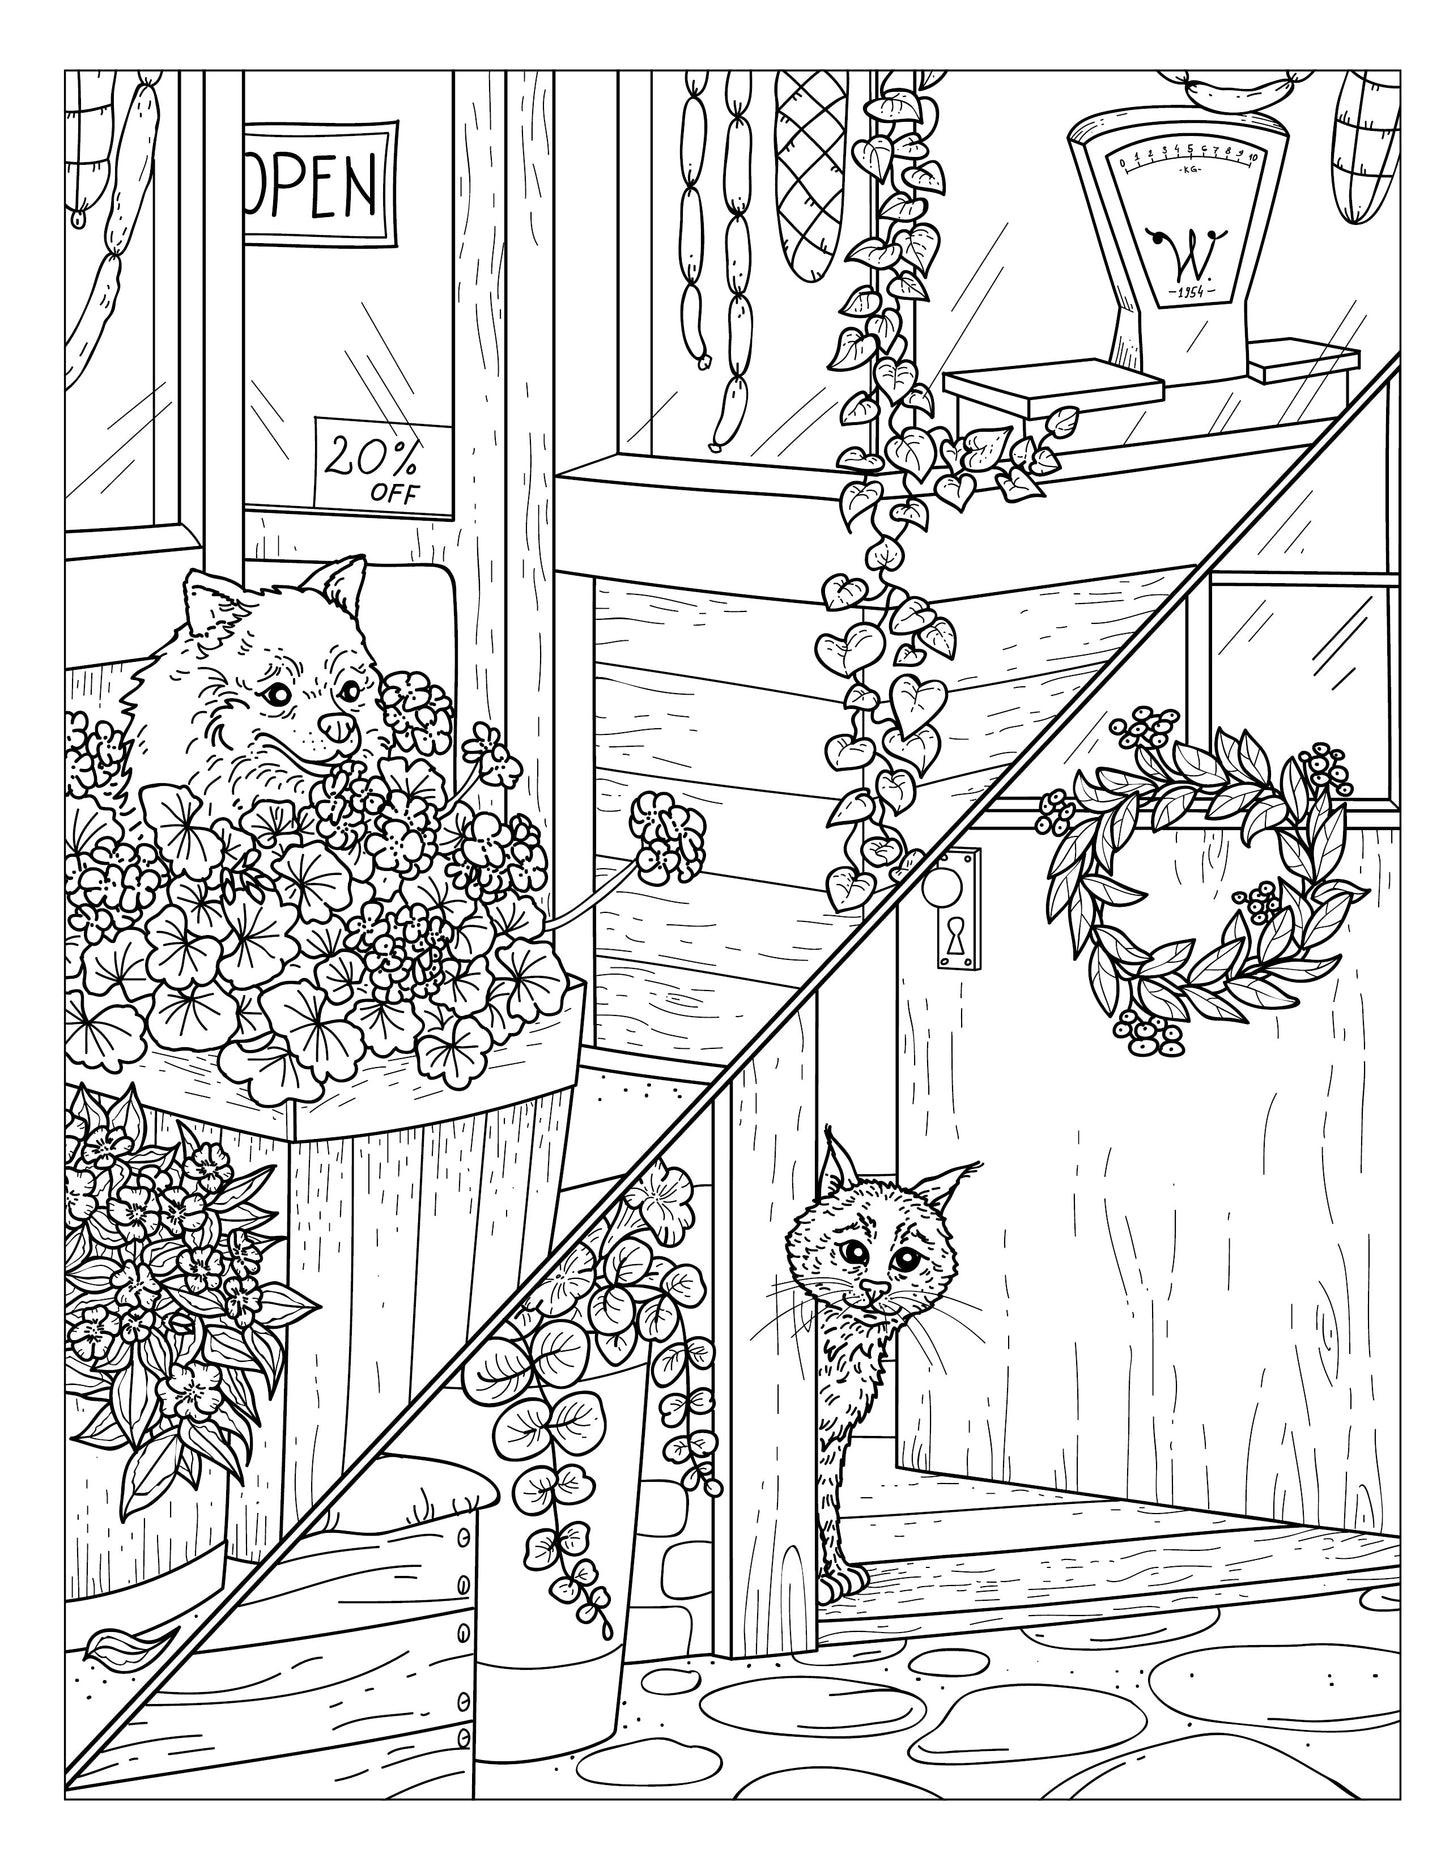 Single Coloring Book Page - Winston & Whiskers, Adventure One - Hiding from Diesel